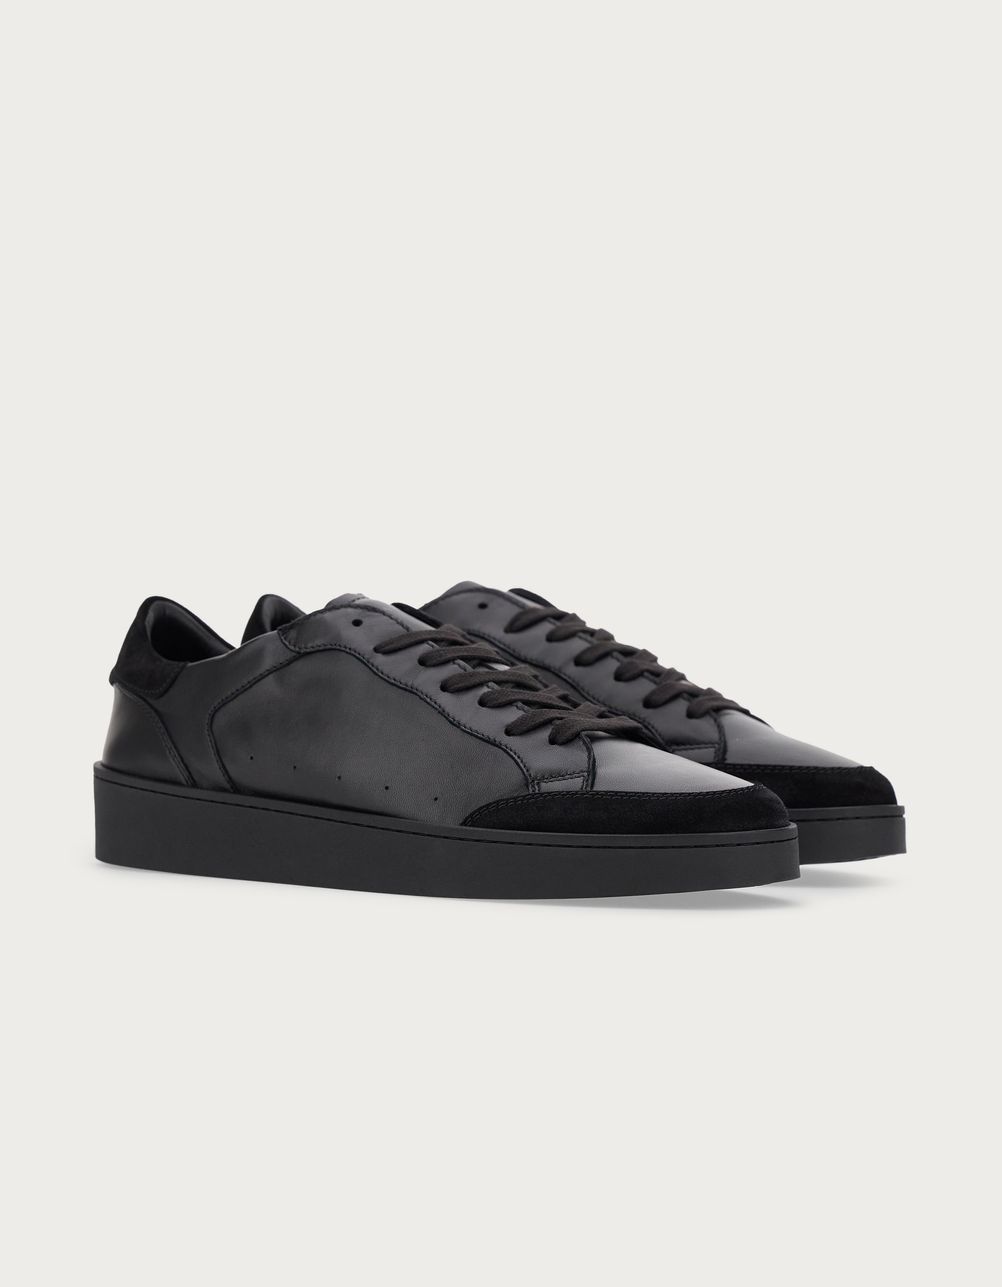 Black leather and suede sneakers